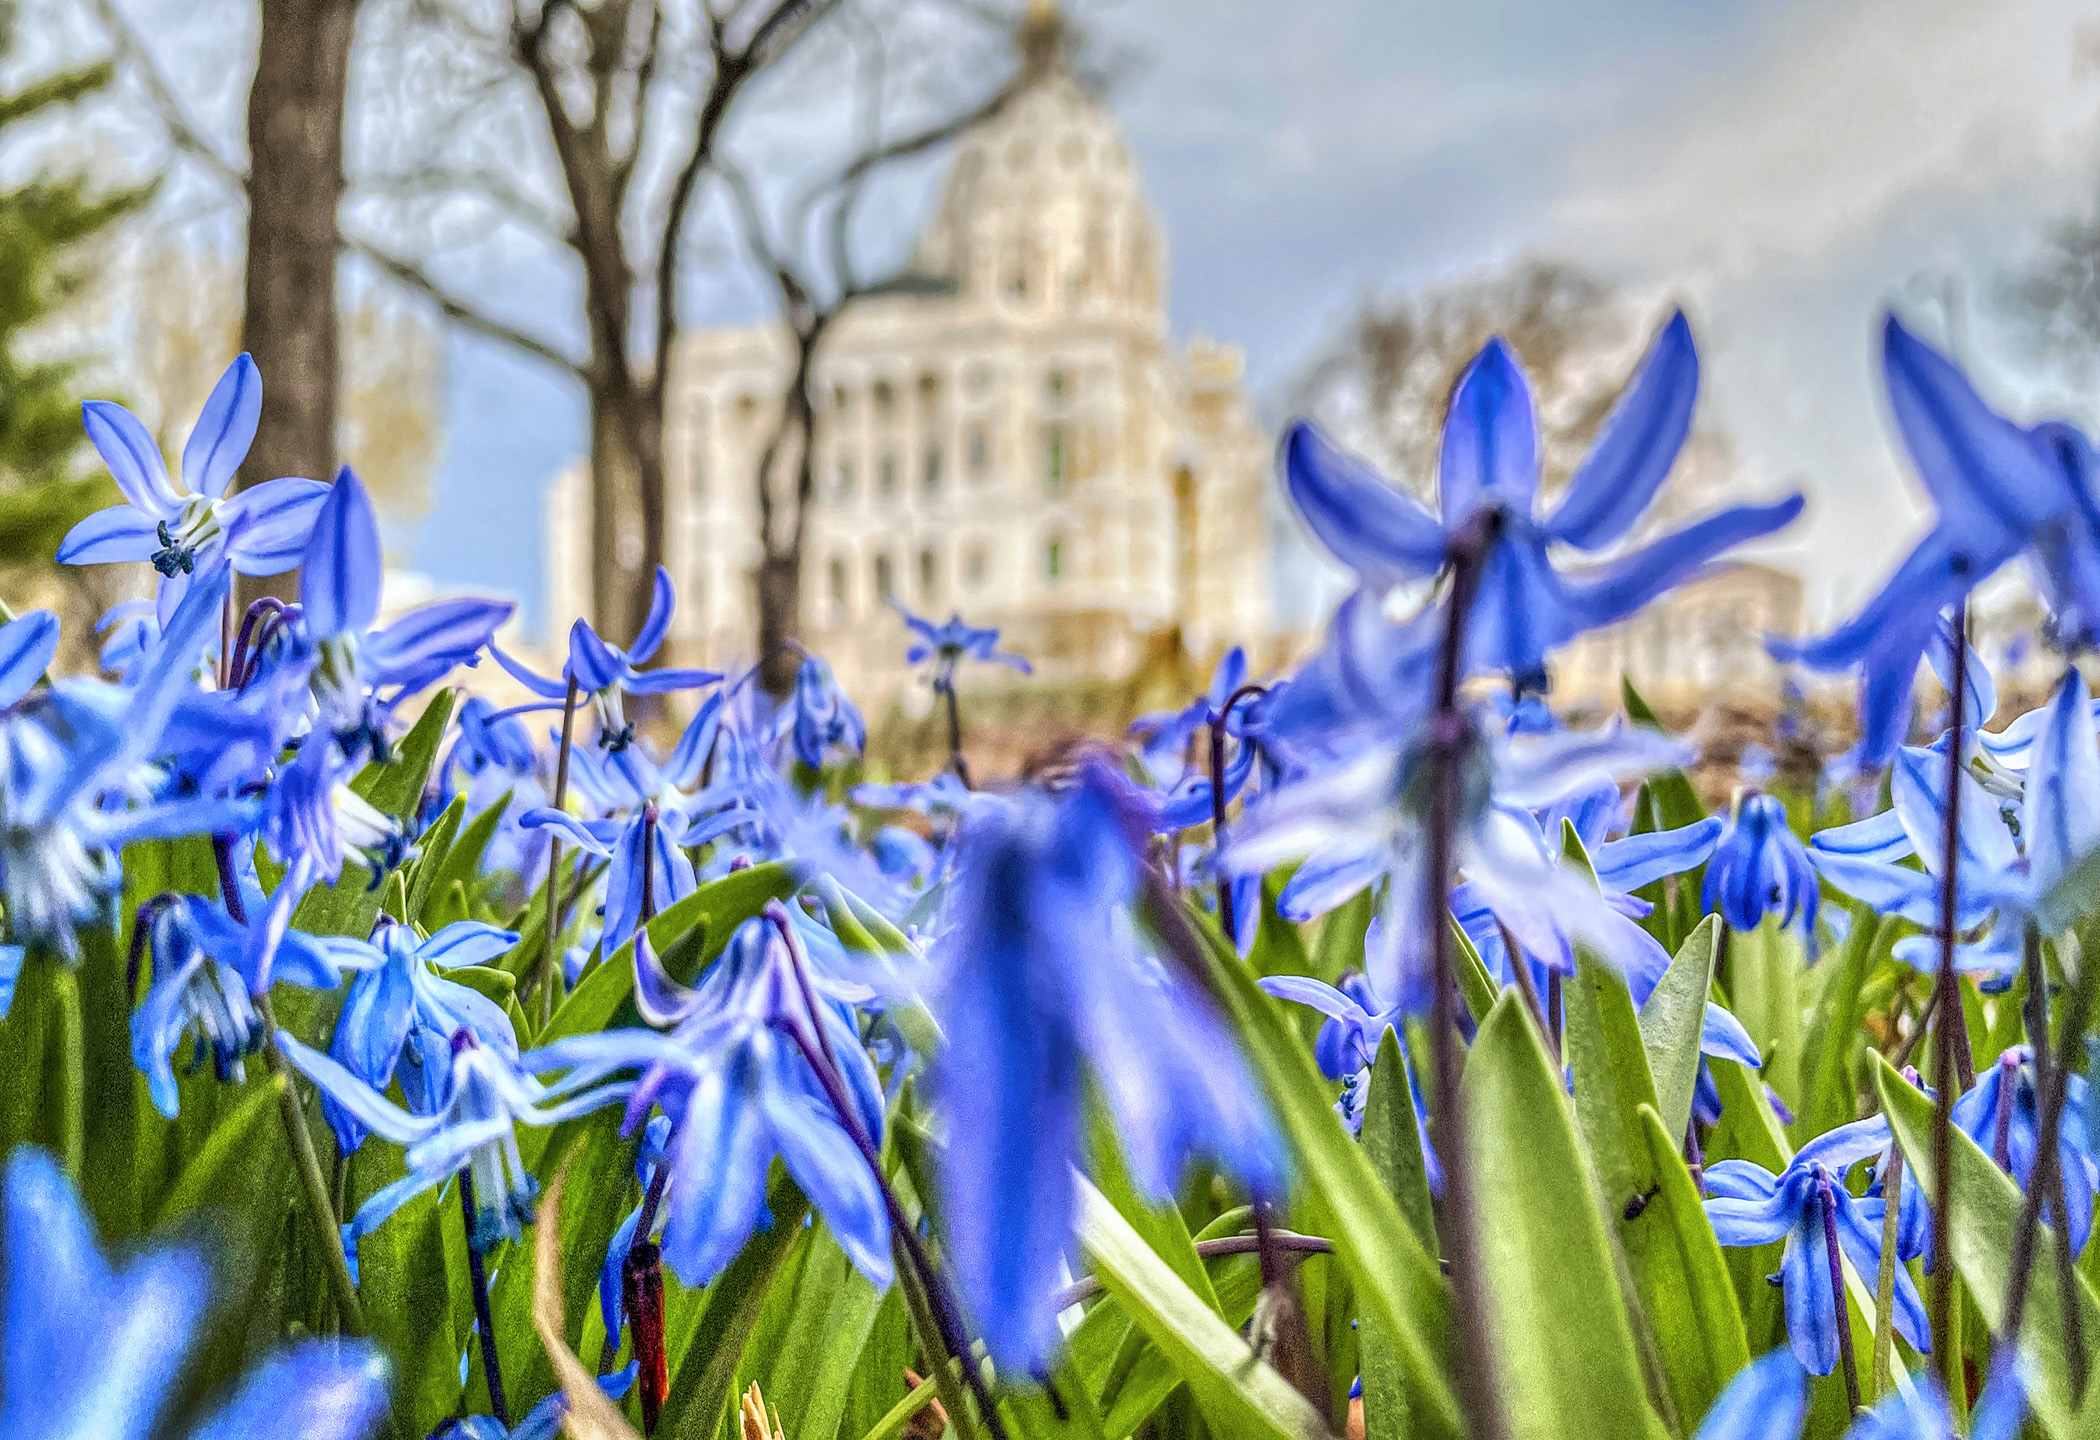 Scilla flowers bloomed around the State Office Building this week, one of the first signs of spring at the Capitol Complex. Photo by Andrew VonBank